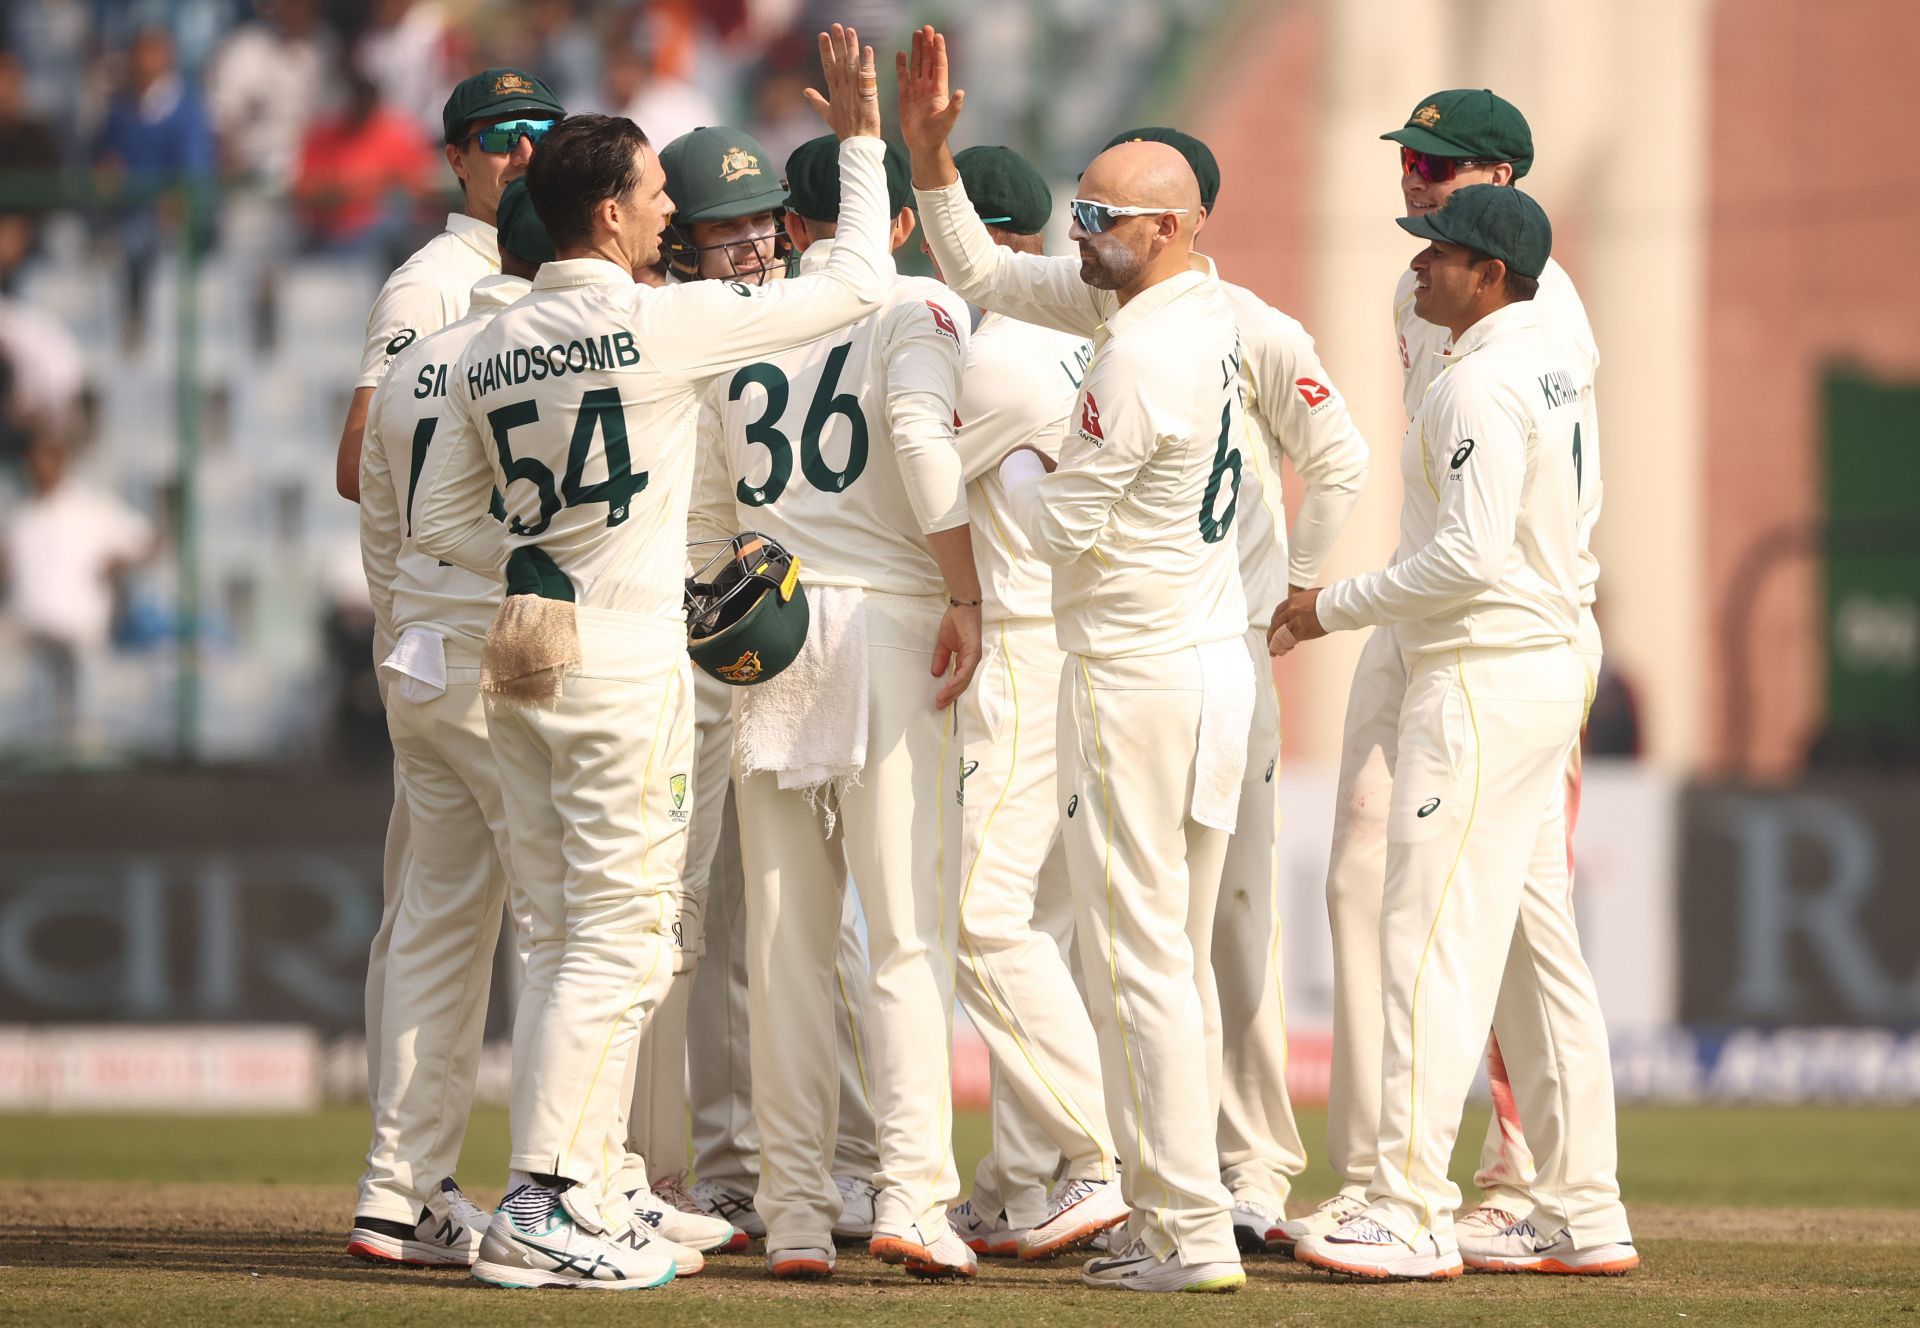 Nathan Lyon helped Australia restrict India to 66-4 before the hosts recovered